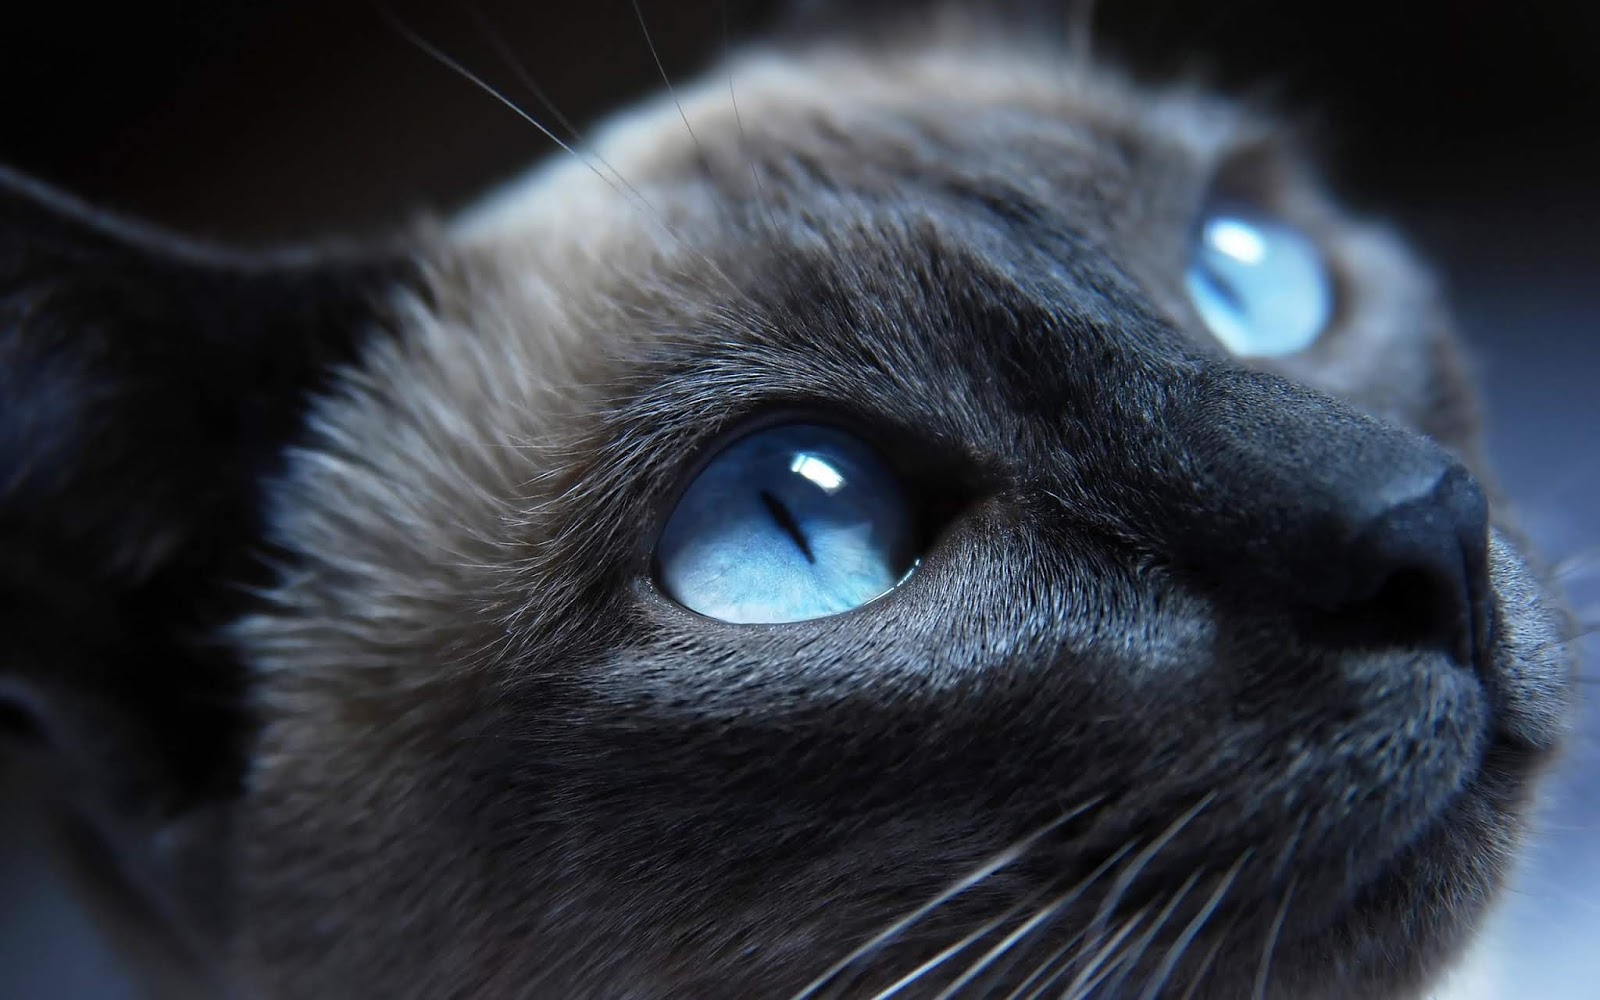 Blue Cat Wallpaper High Quality Desktop, iphone and android - Background and Wallpaper | Animals